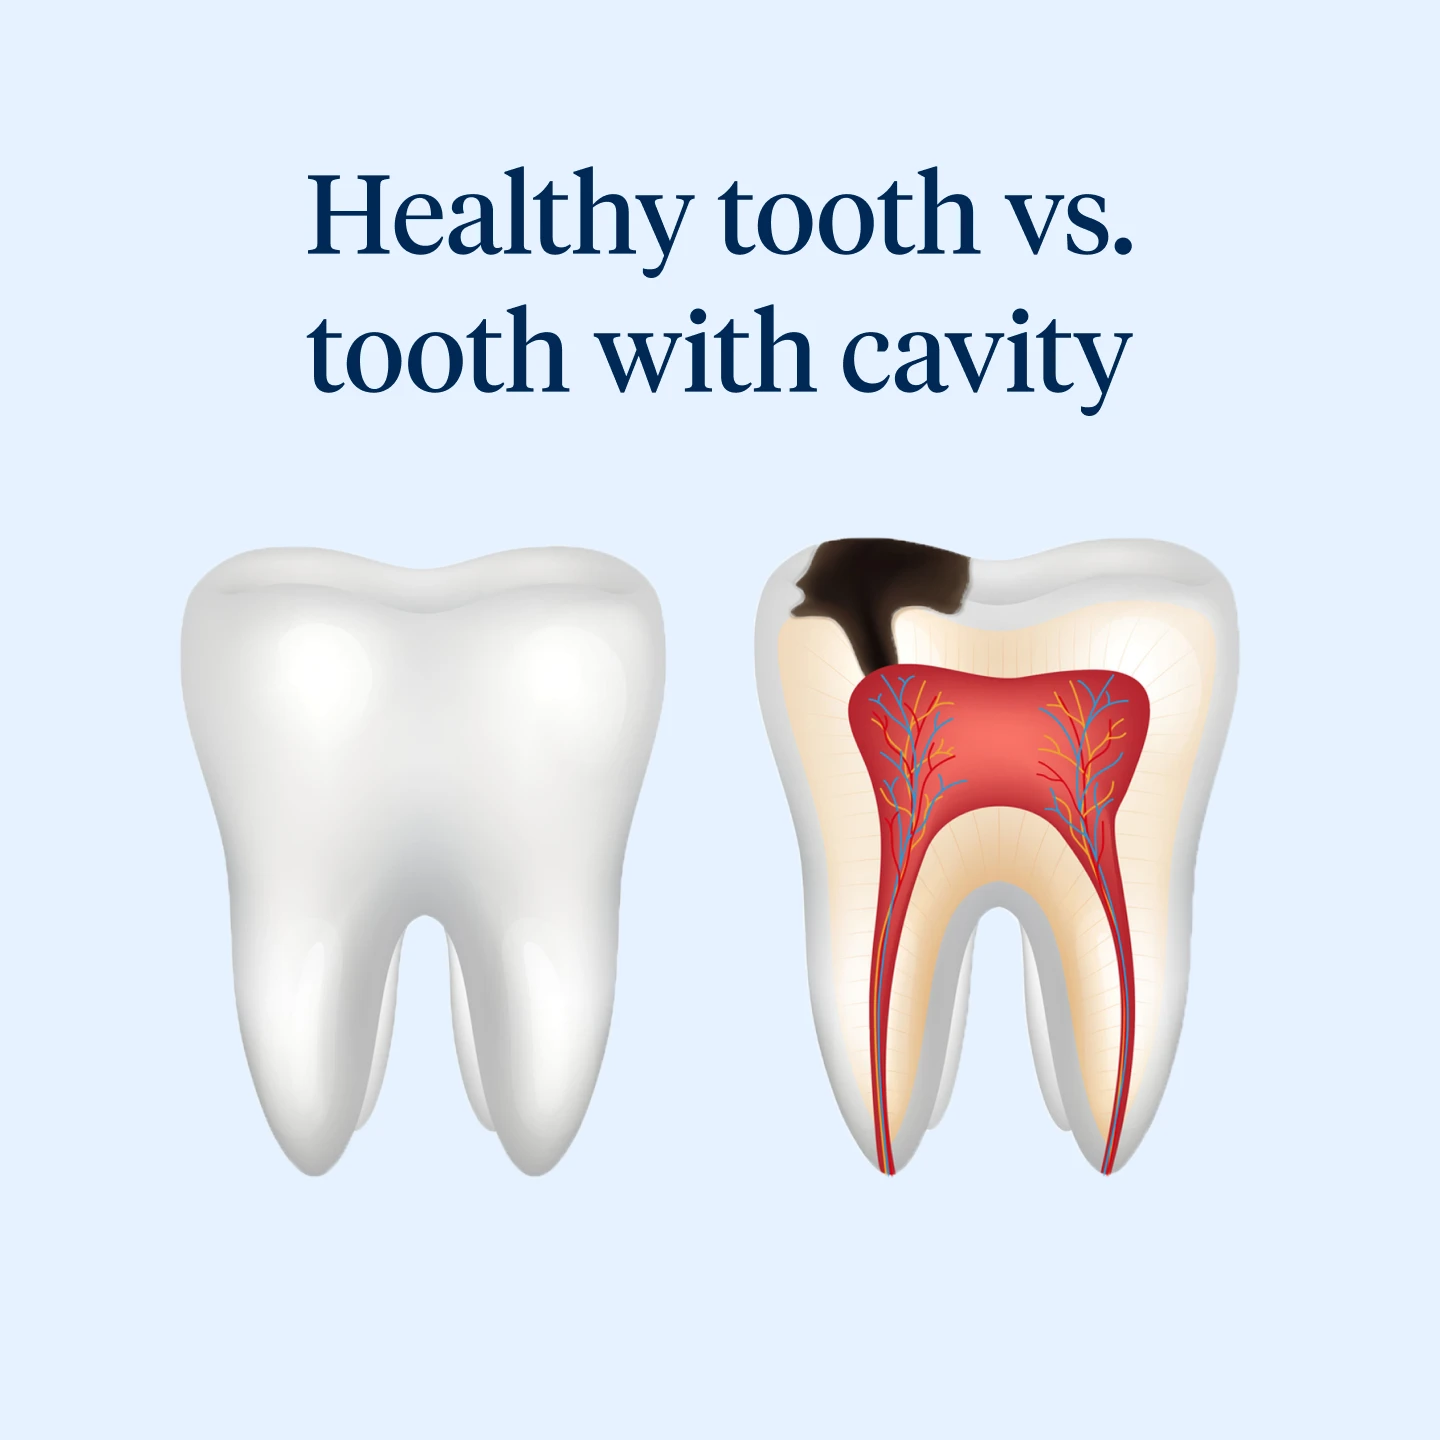 Healthy tooth vs tooth with cavity. 